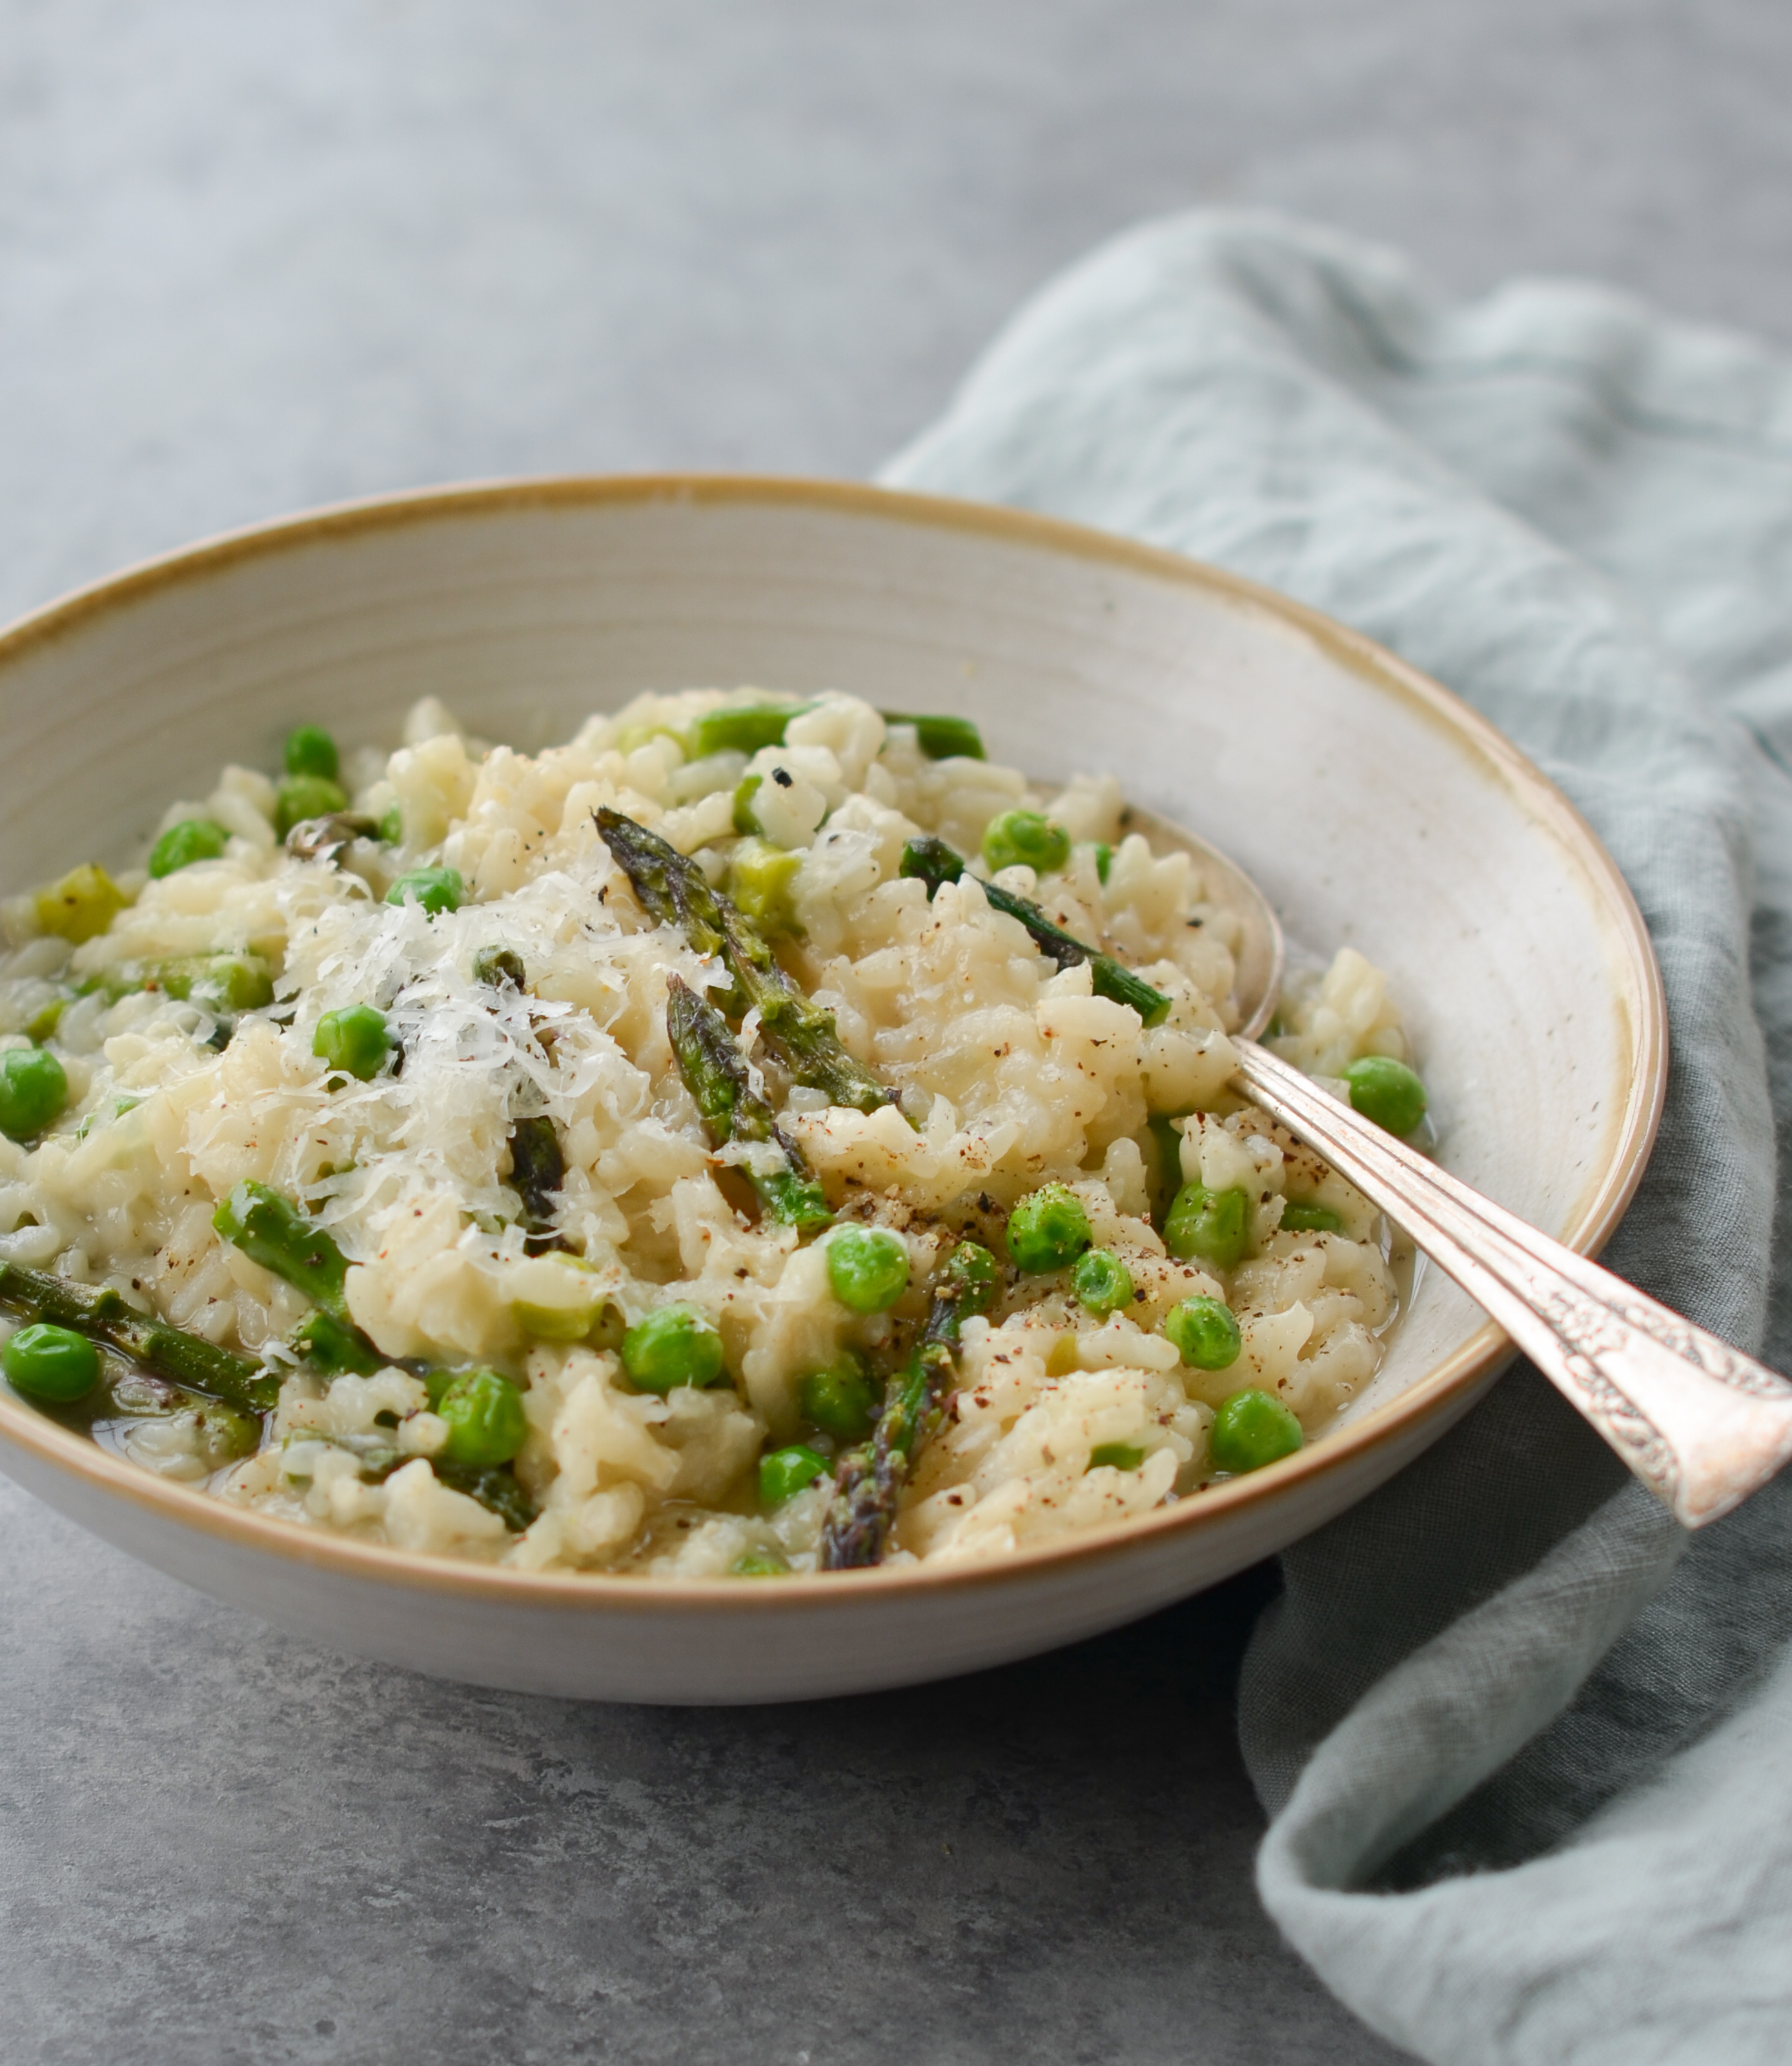 https://www.onceuponachef.com/images/2019/04/Spring-Risotto-with-Asparagus-and-Peas.jpg